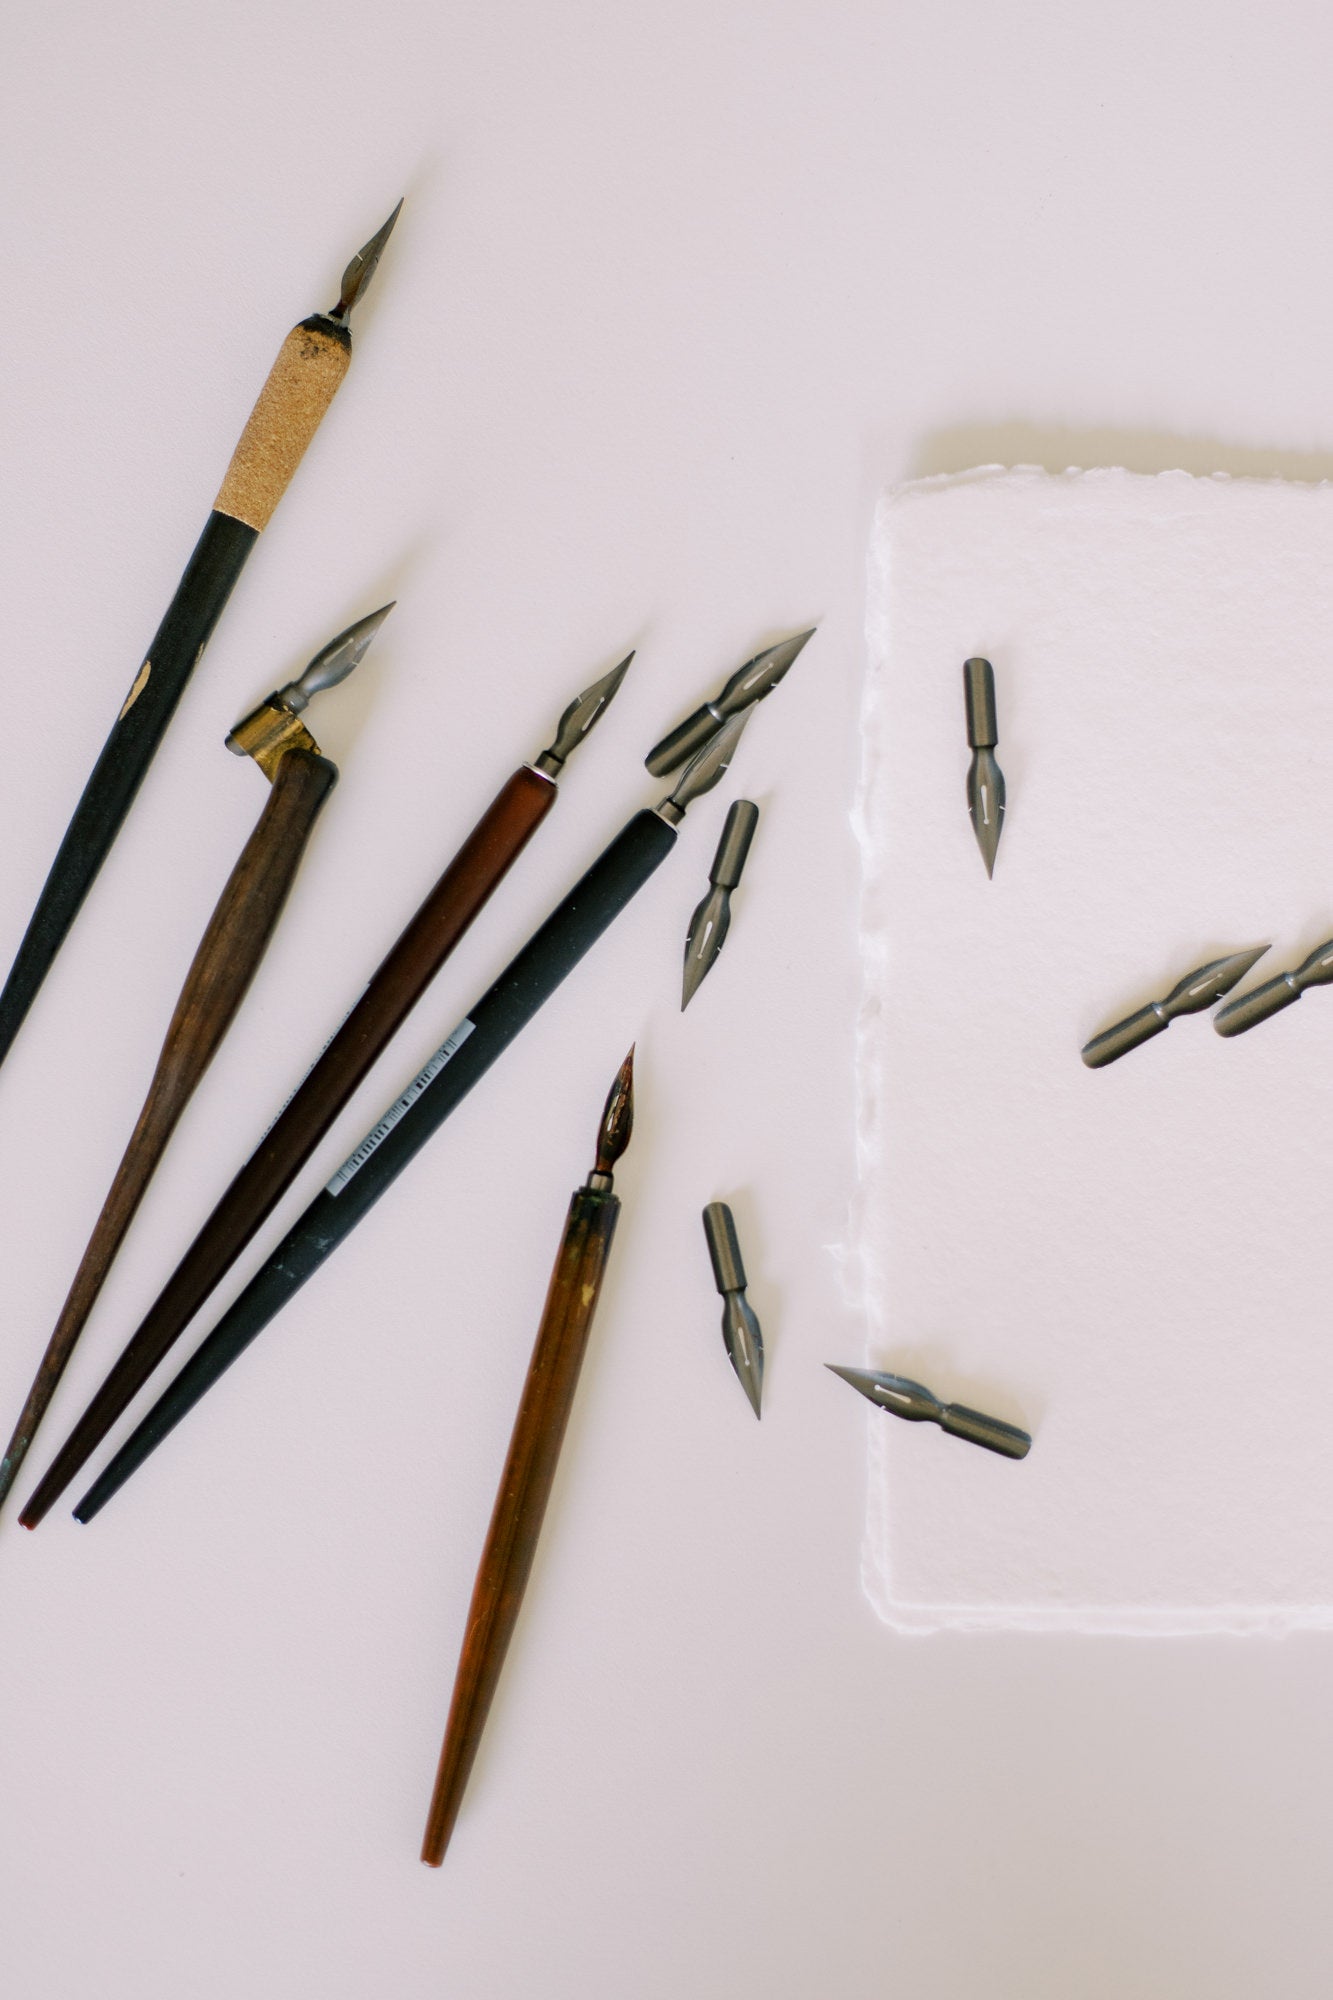 Handmade paper and calligraphy - a timeless duo. Discover the joy of working with these mediums by finding the perfect balance of ink and nib.